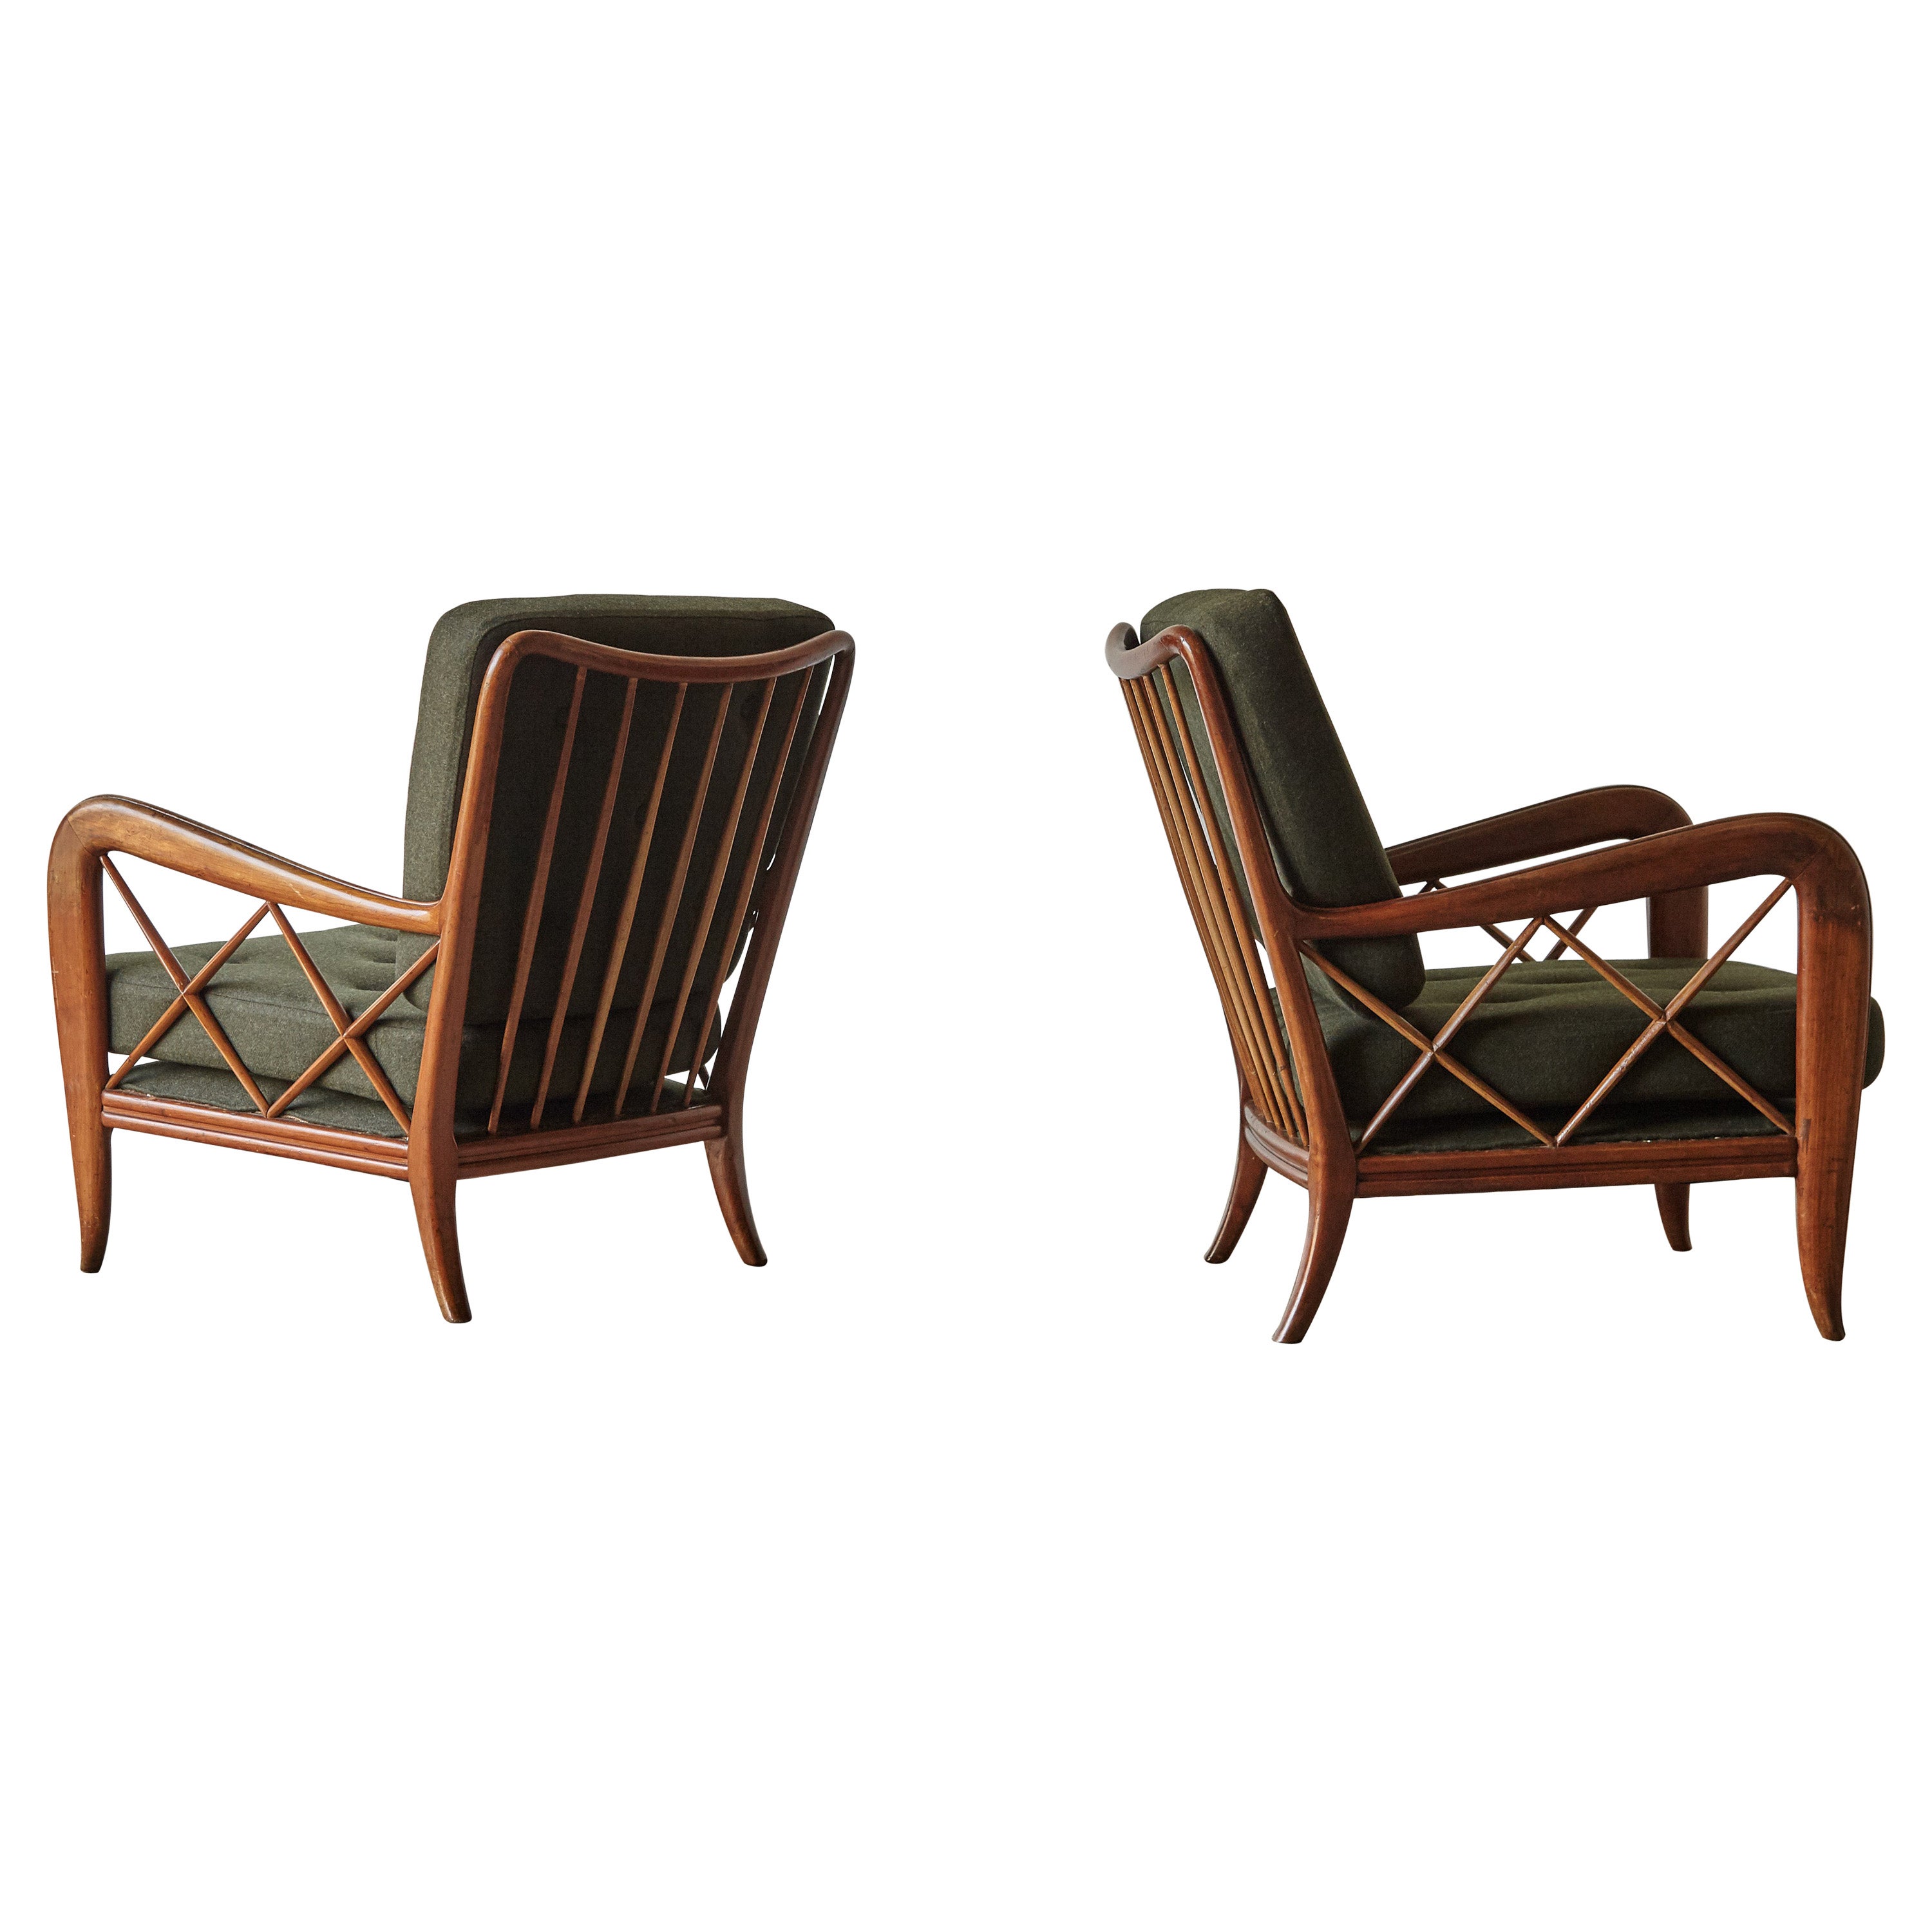 Elegant Pair of Armchairs Attributed to Paolo Buffa, Italy, 1950s